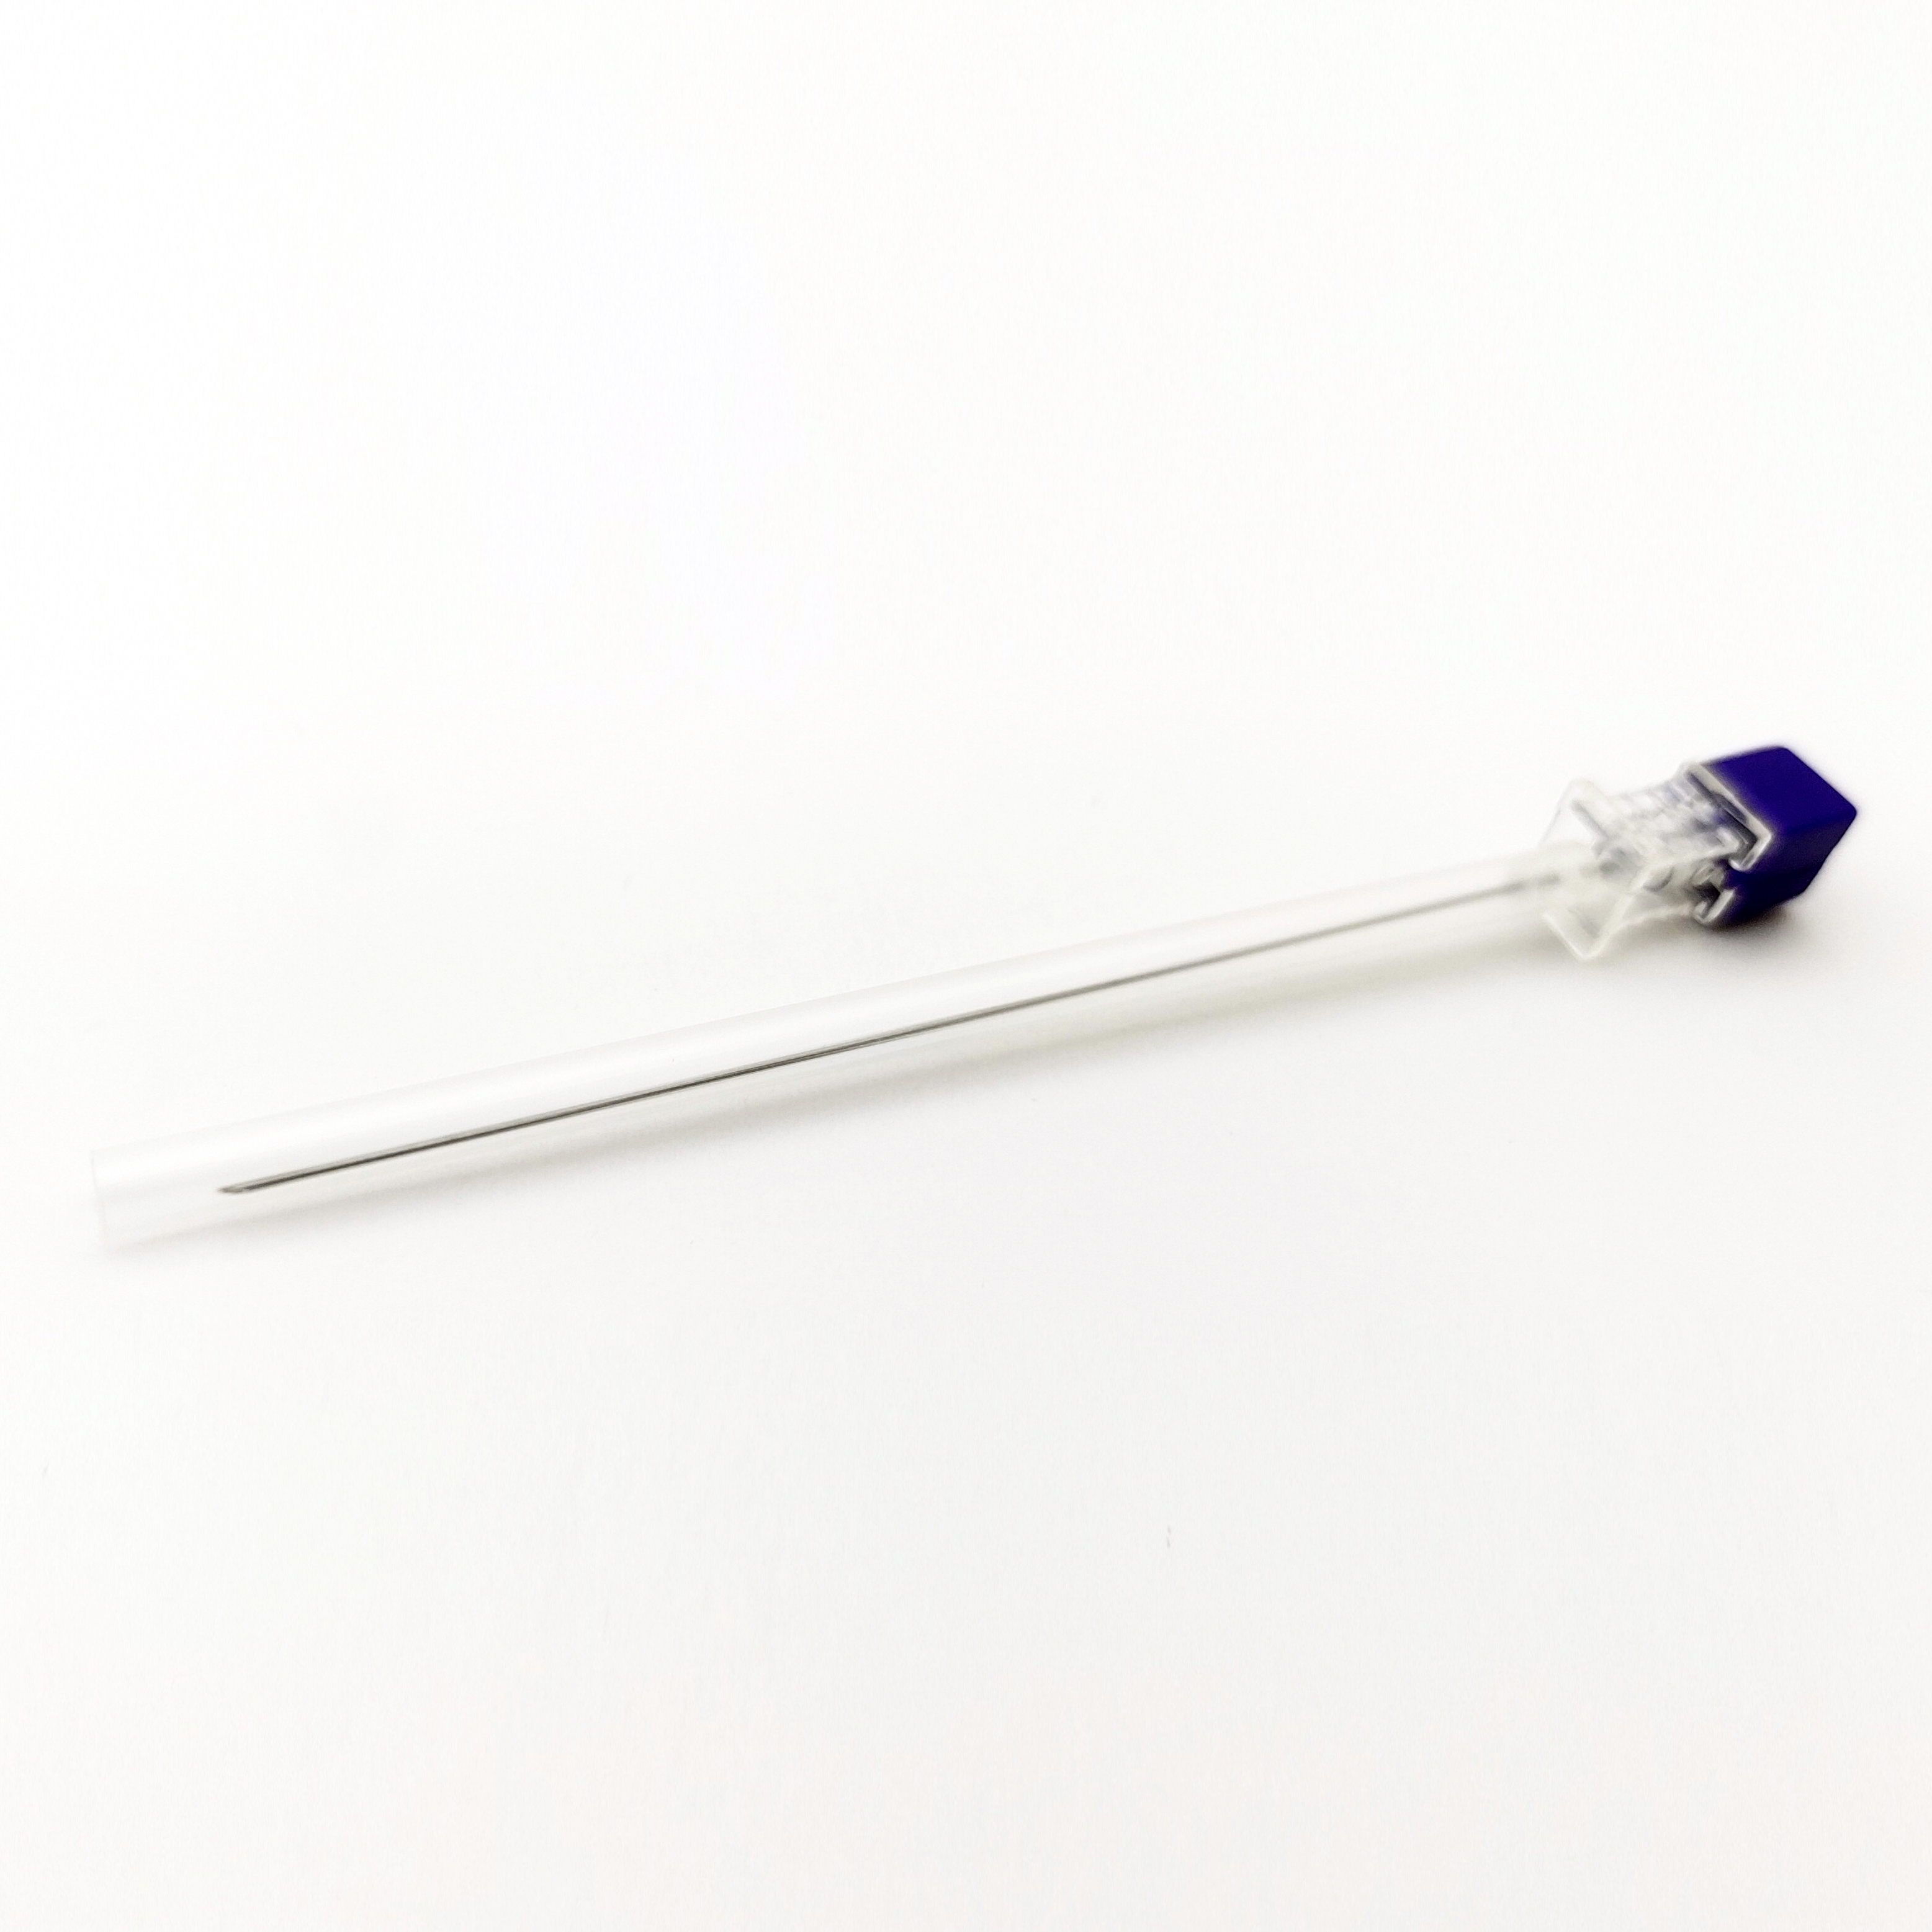 Spinal anesthesia needle 